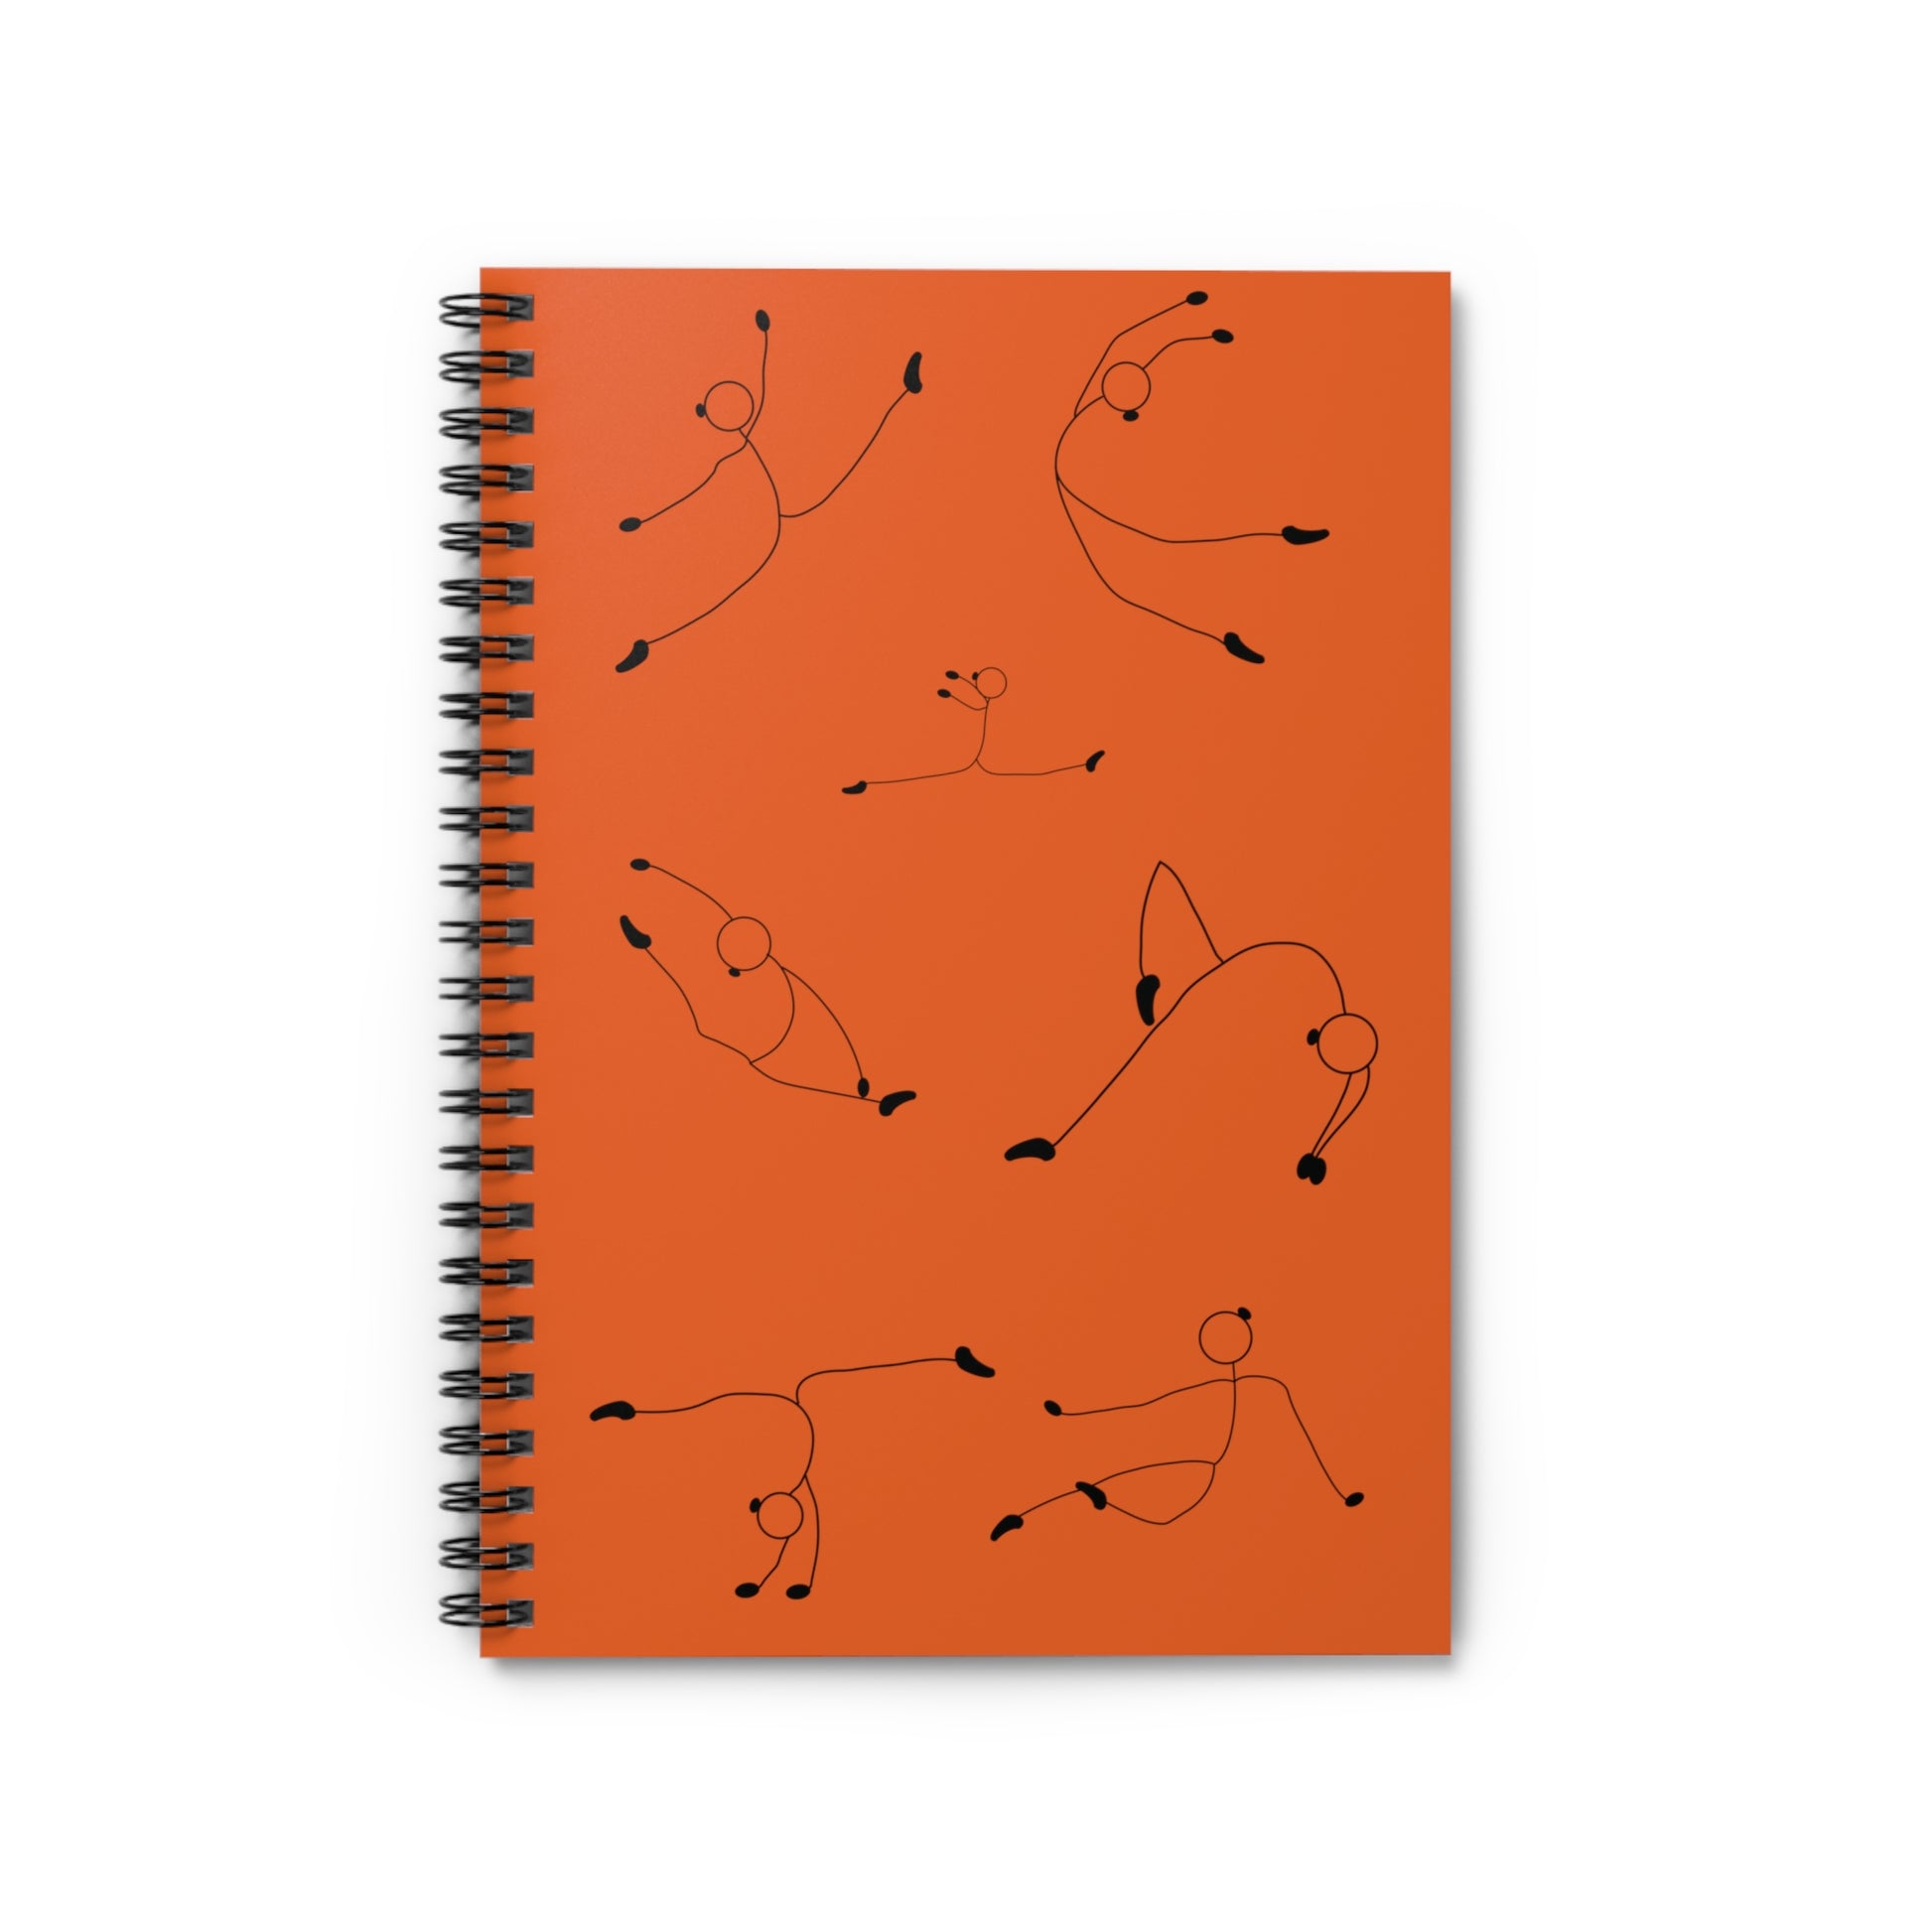 Dancing Soul: Spiral Notebook - Log Books - Journals - Diaries - and More Custom Printed by TheGlassyLass